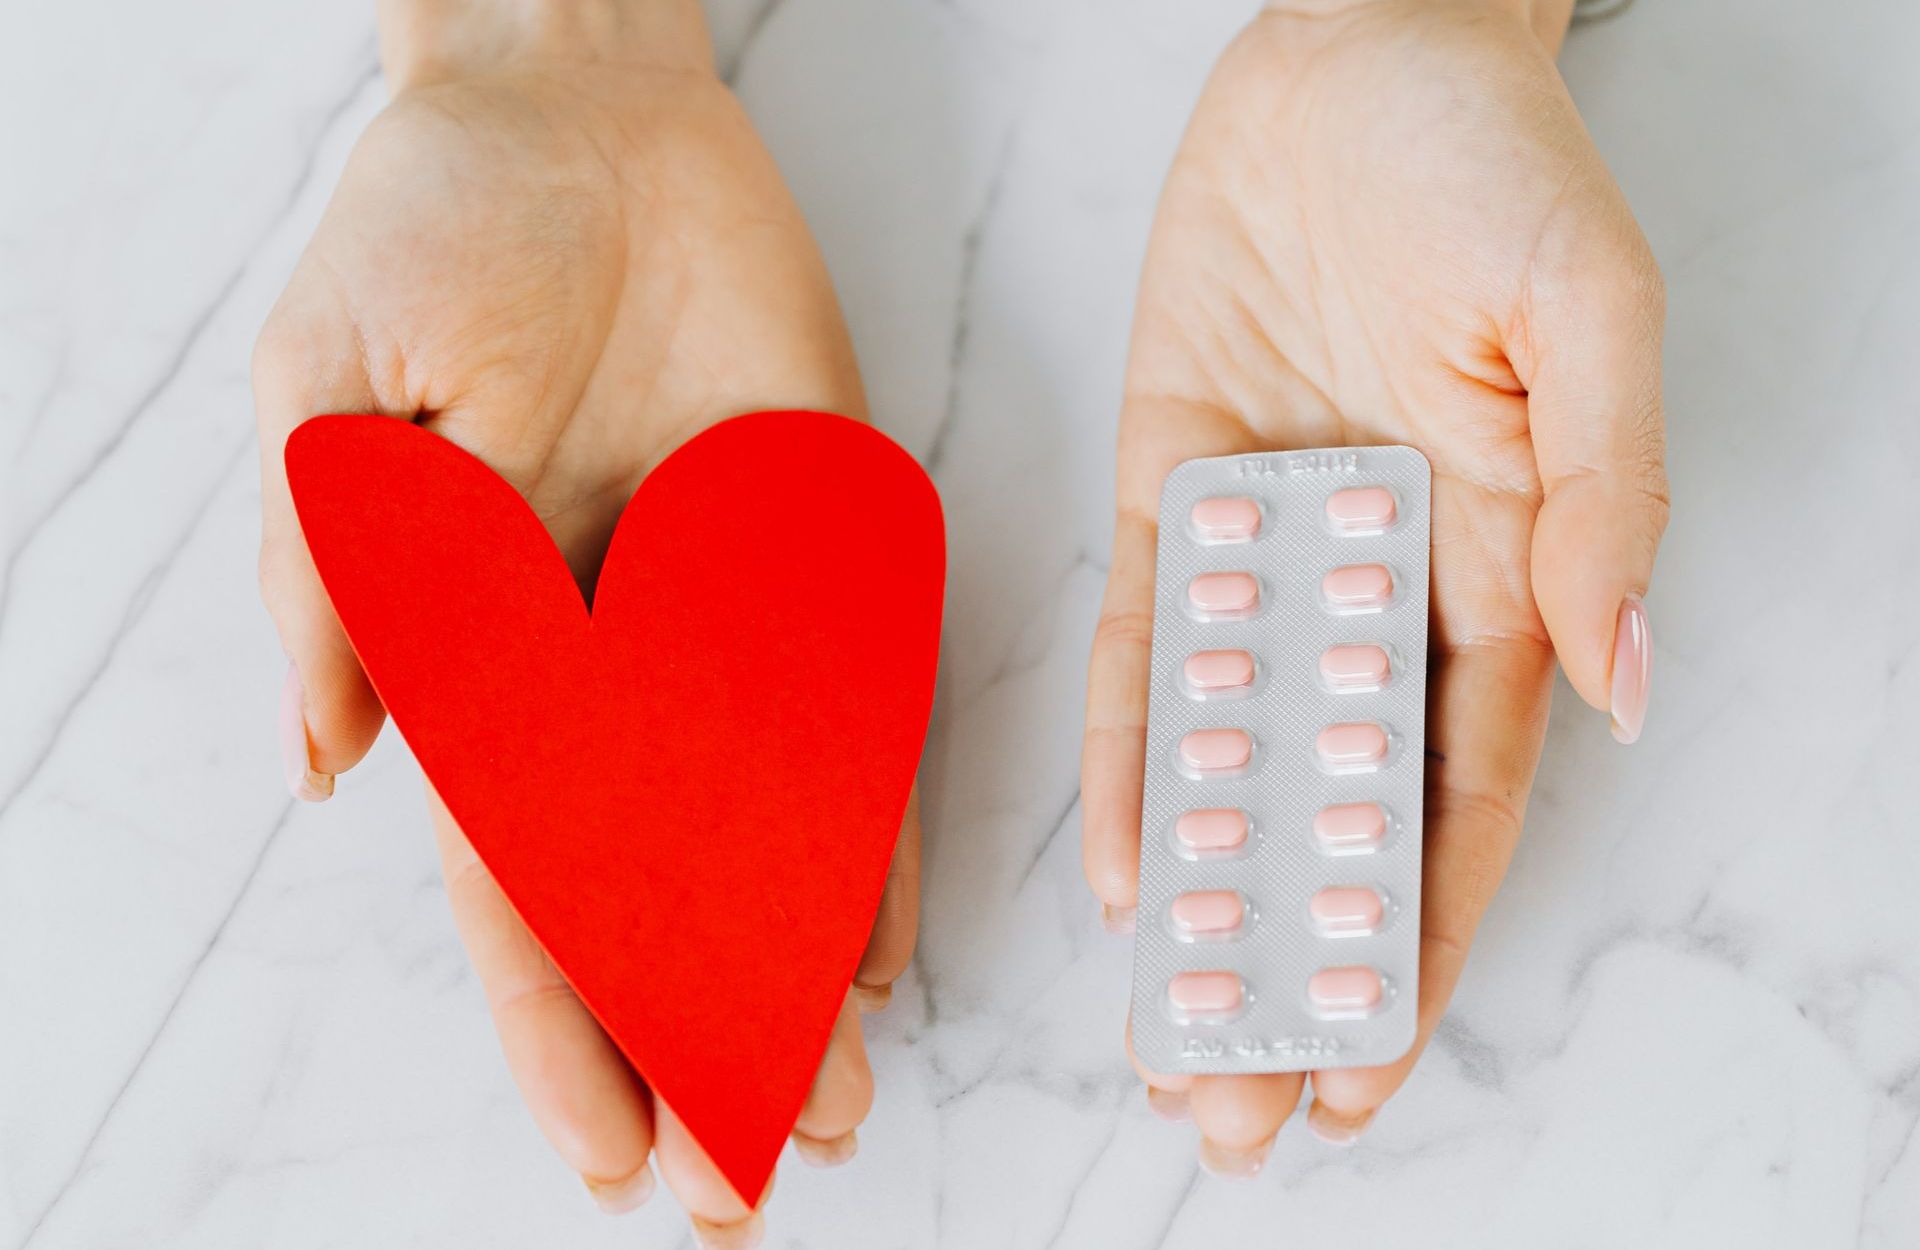 A woman is holding a red heart and a blister pack of pills.